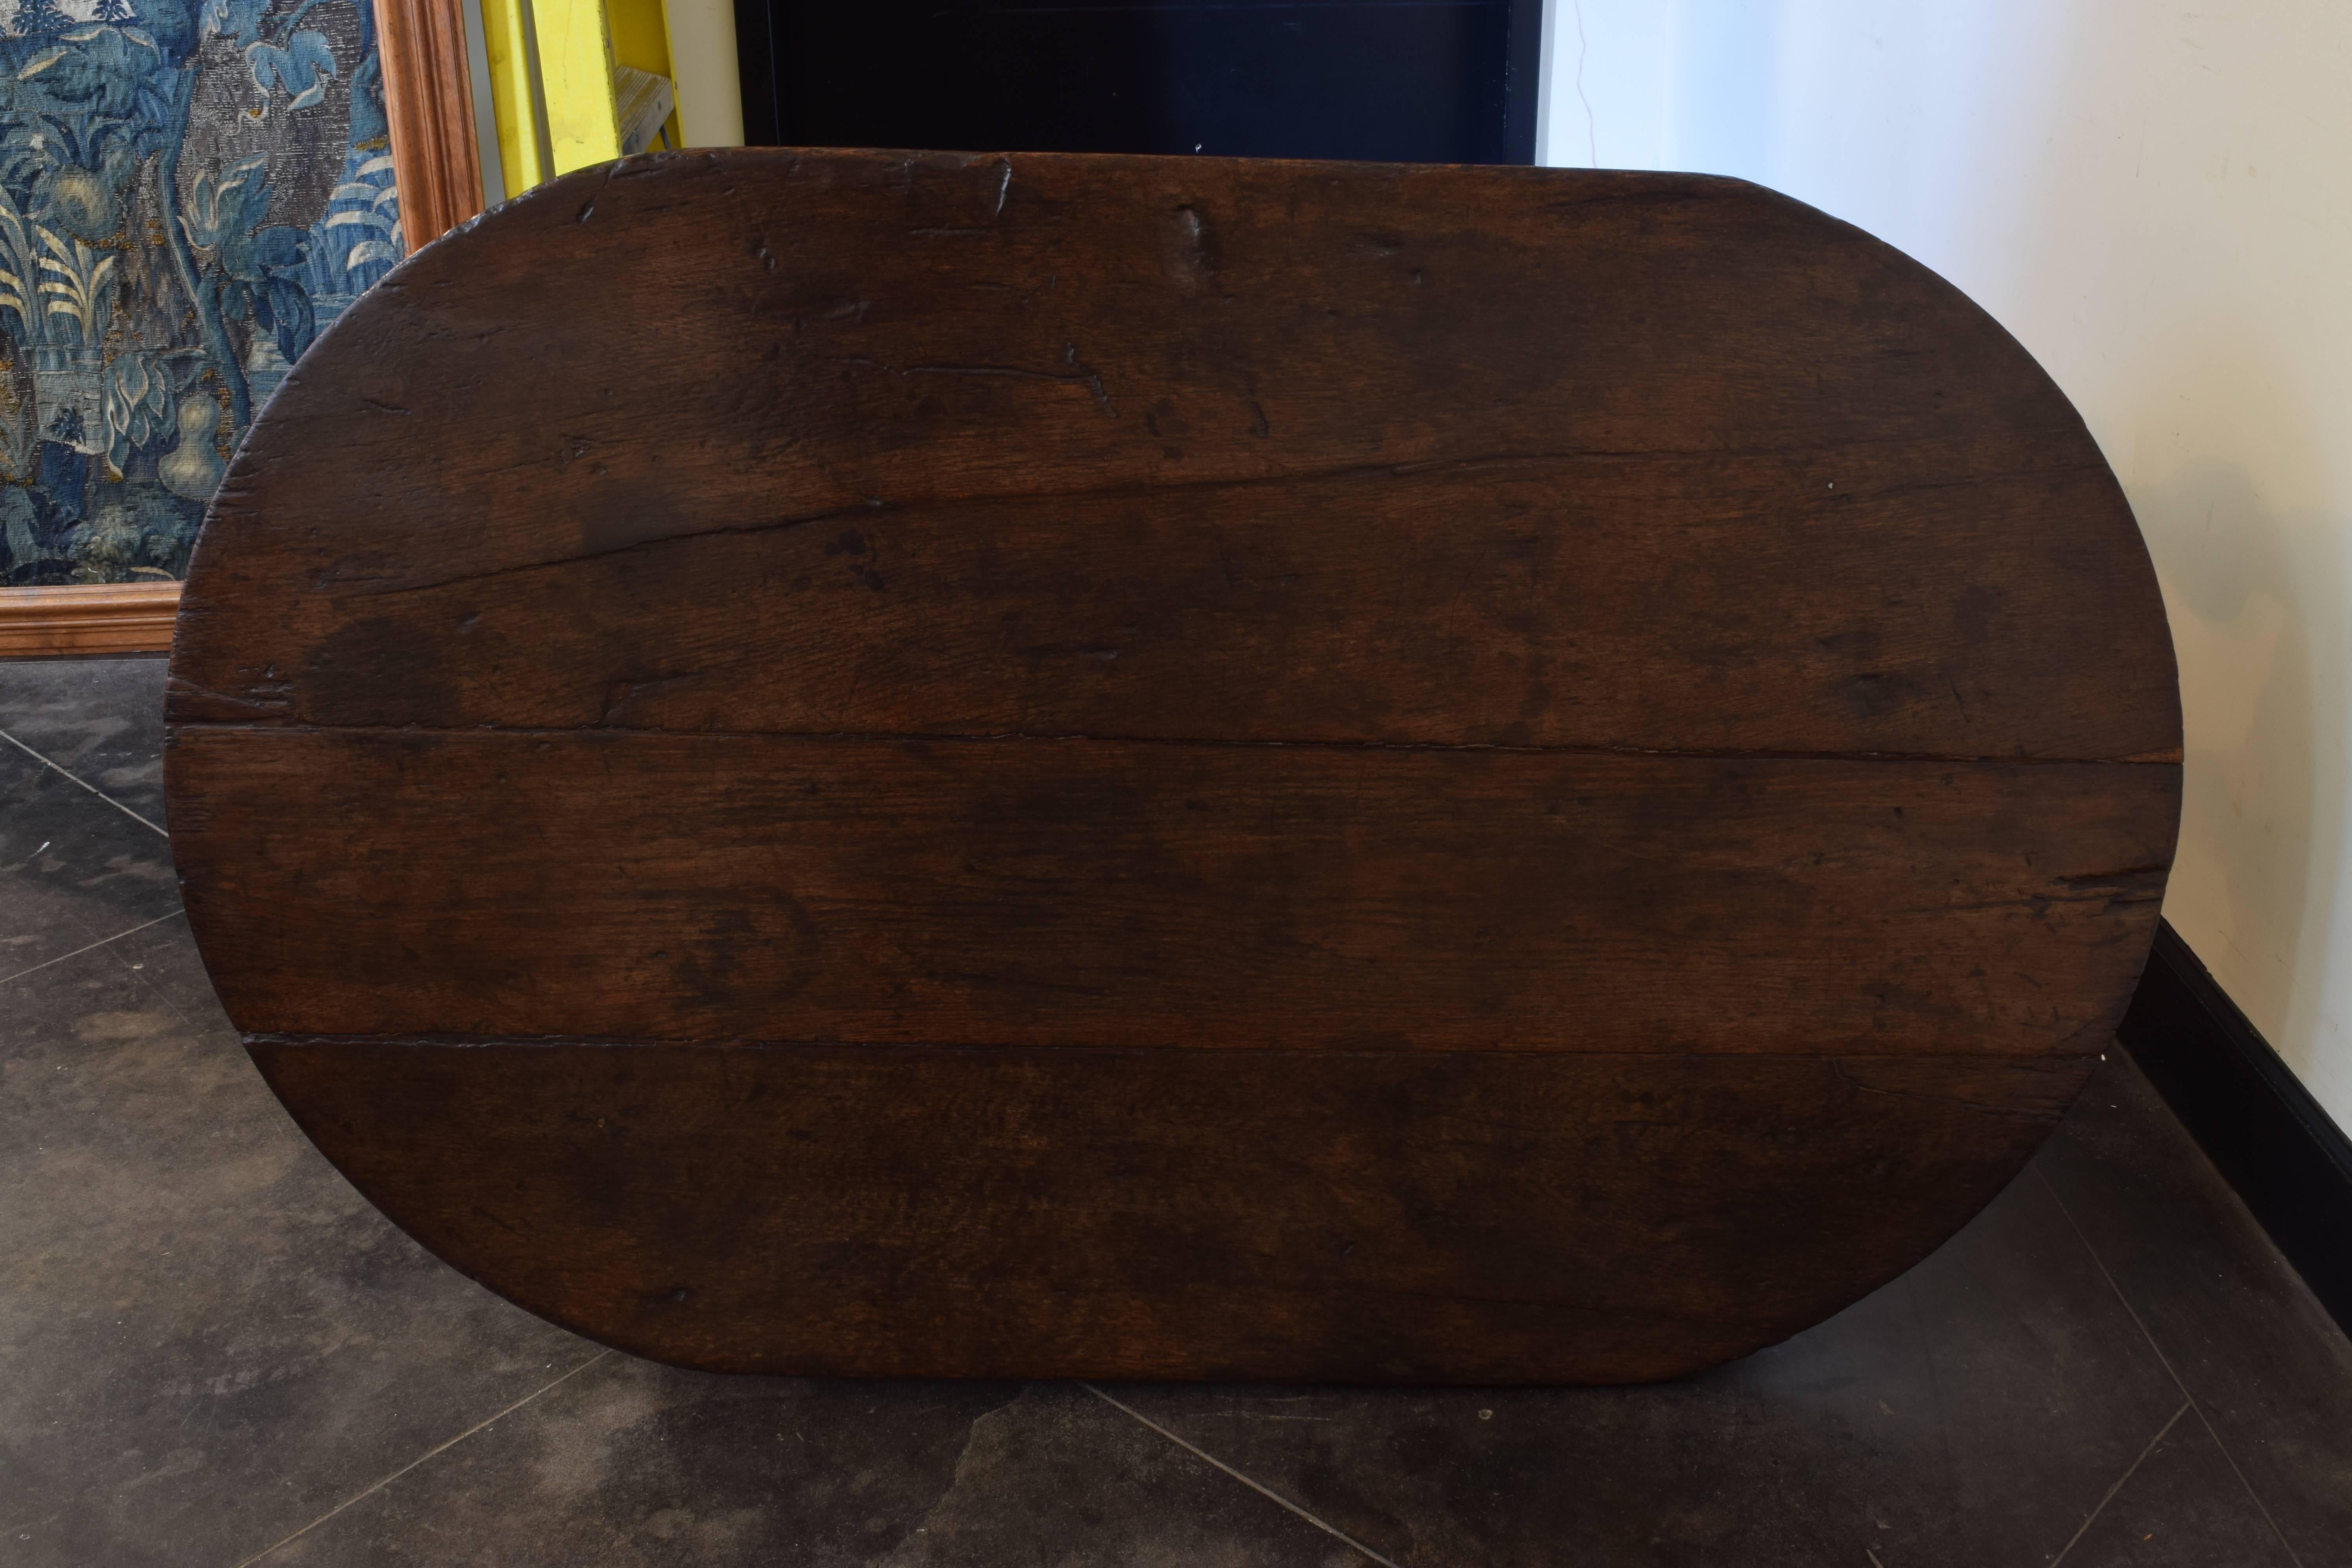 Flemish Carved Turned and Shaped Dark Oak Oval Table, Early 17th Century 4